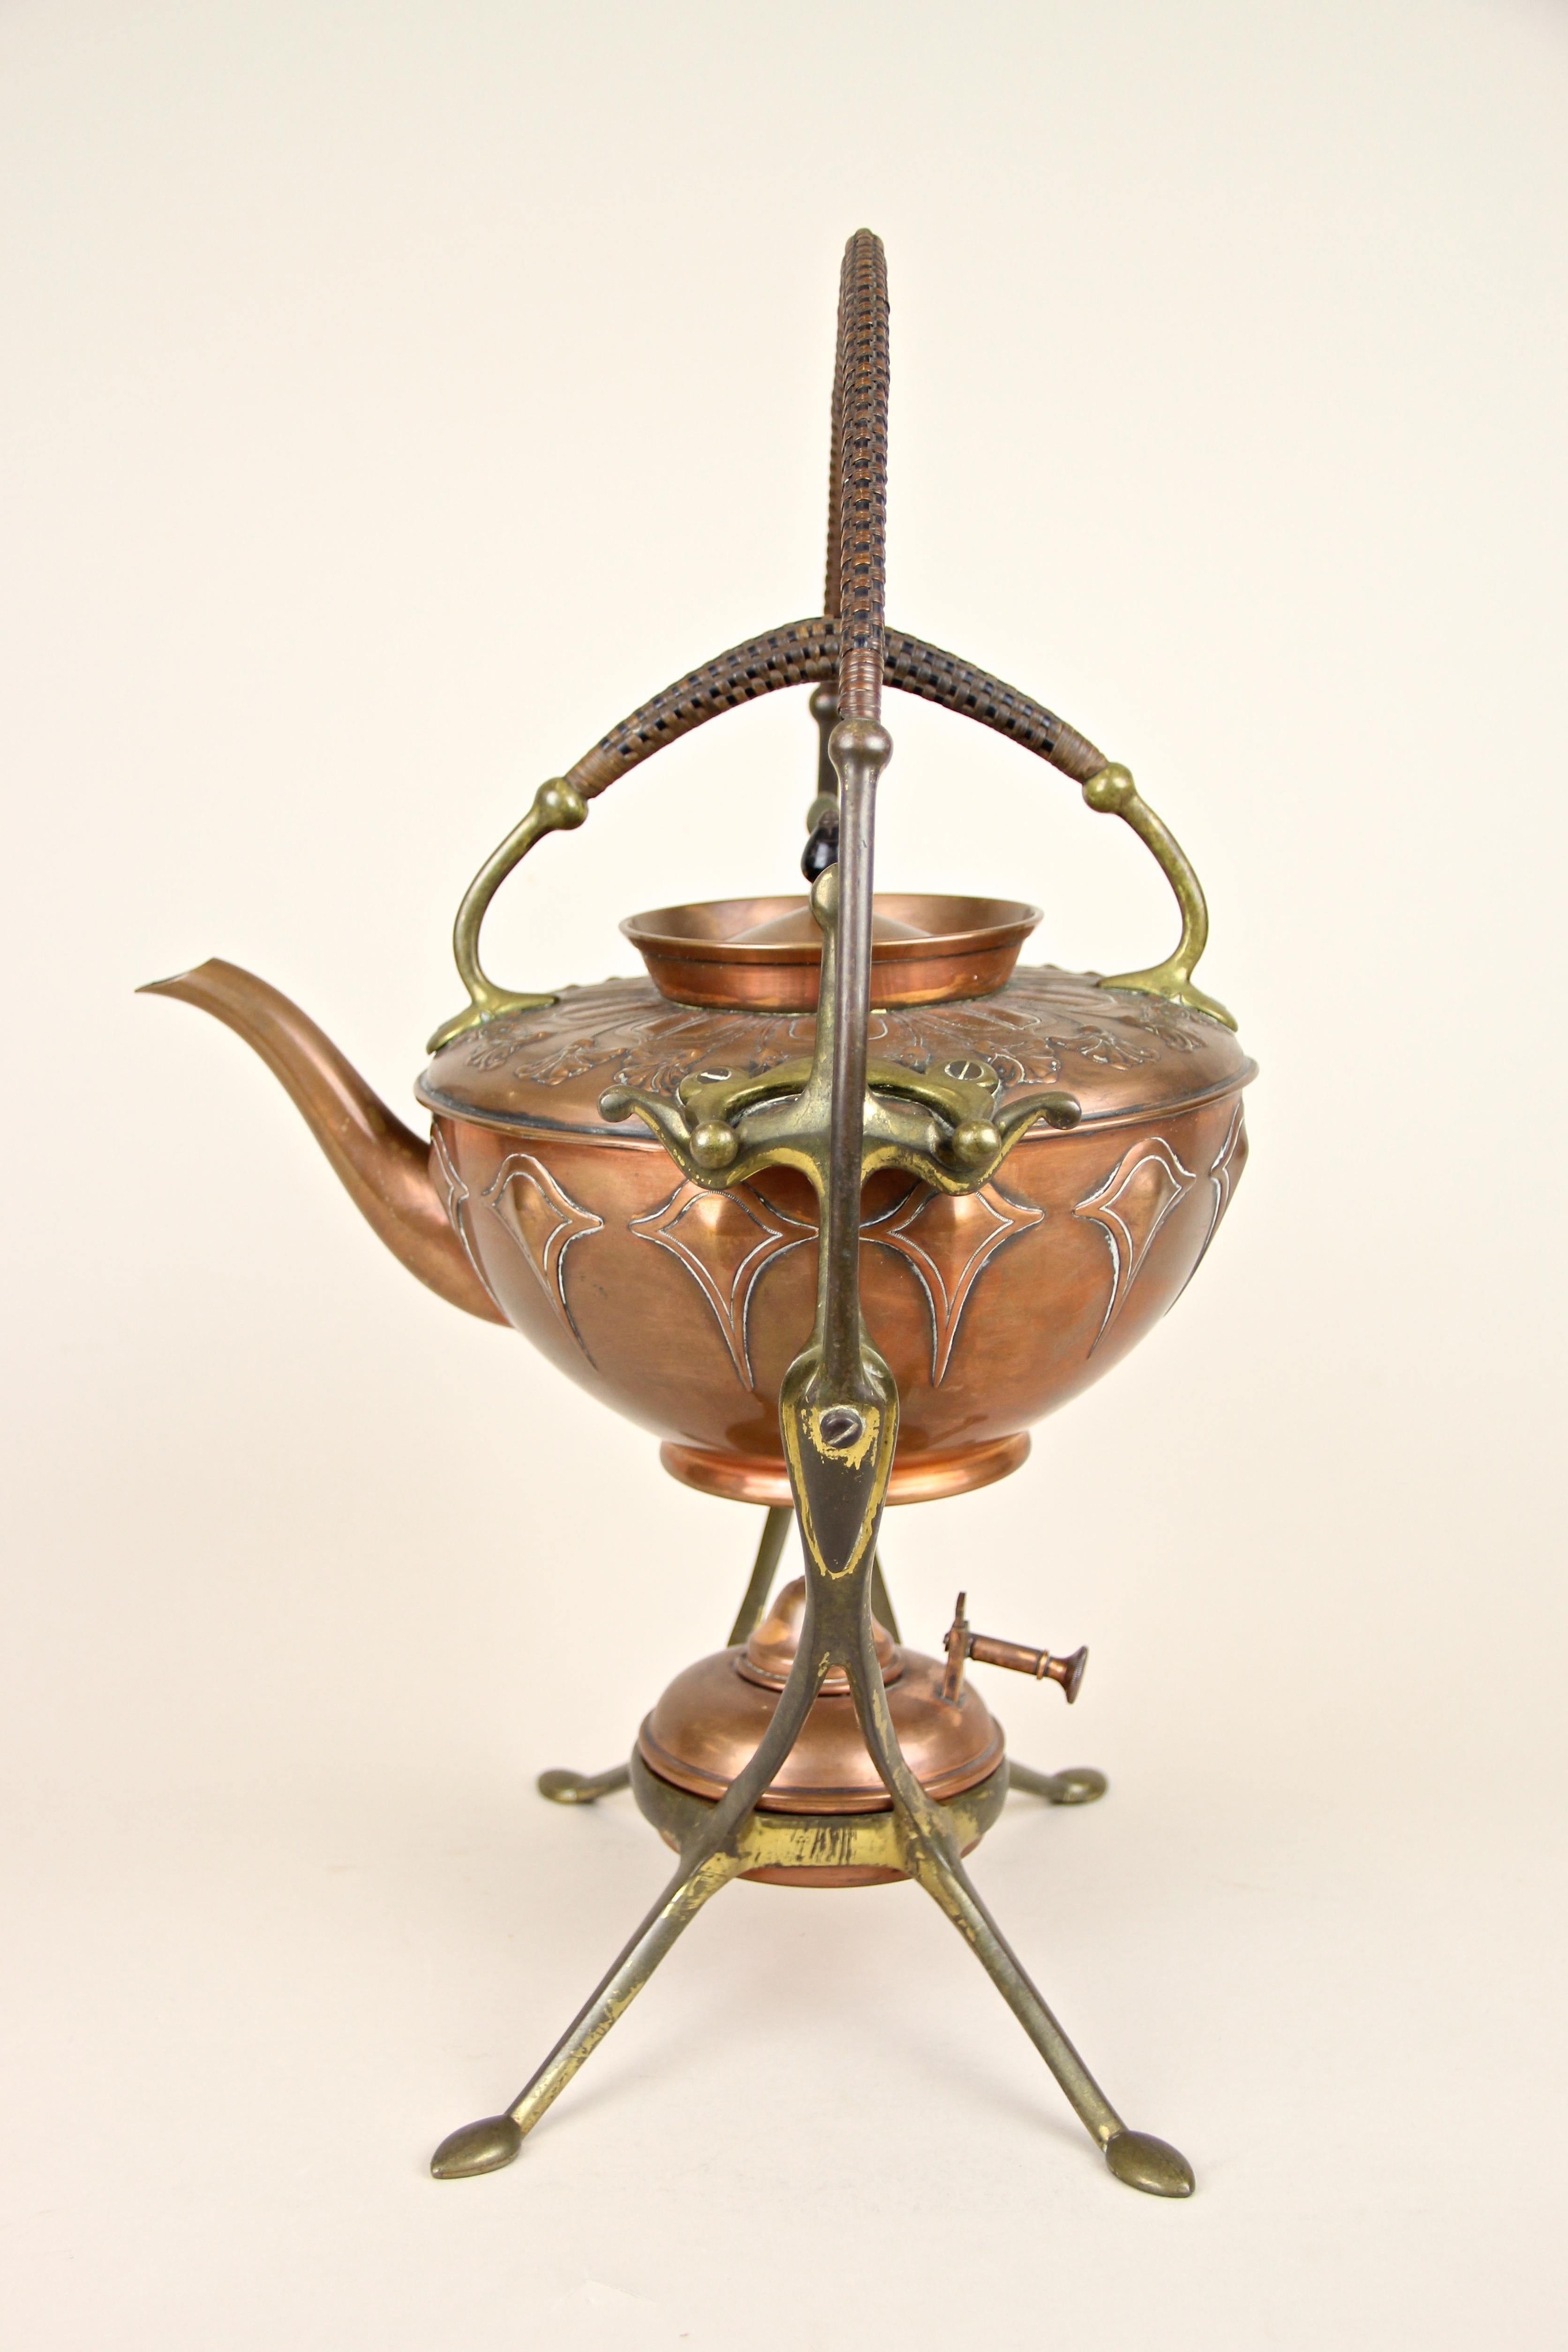 Absolute rare 20th century WMF tea set from the early Art Deco period in Germany, circa 1920. This impressing tea set consists of three very artfully worked pieces: an embossed, copper-plated metal teapot showing fantastic floral ornamentation, a